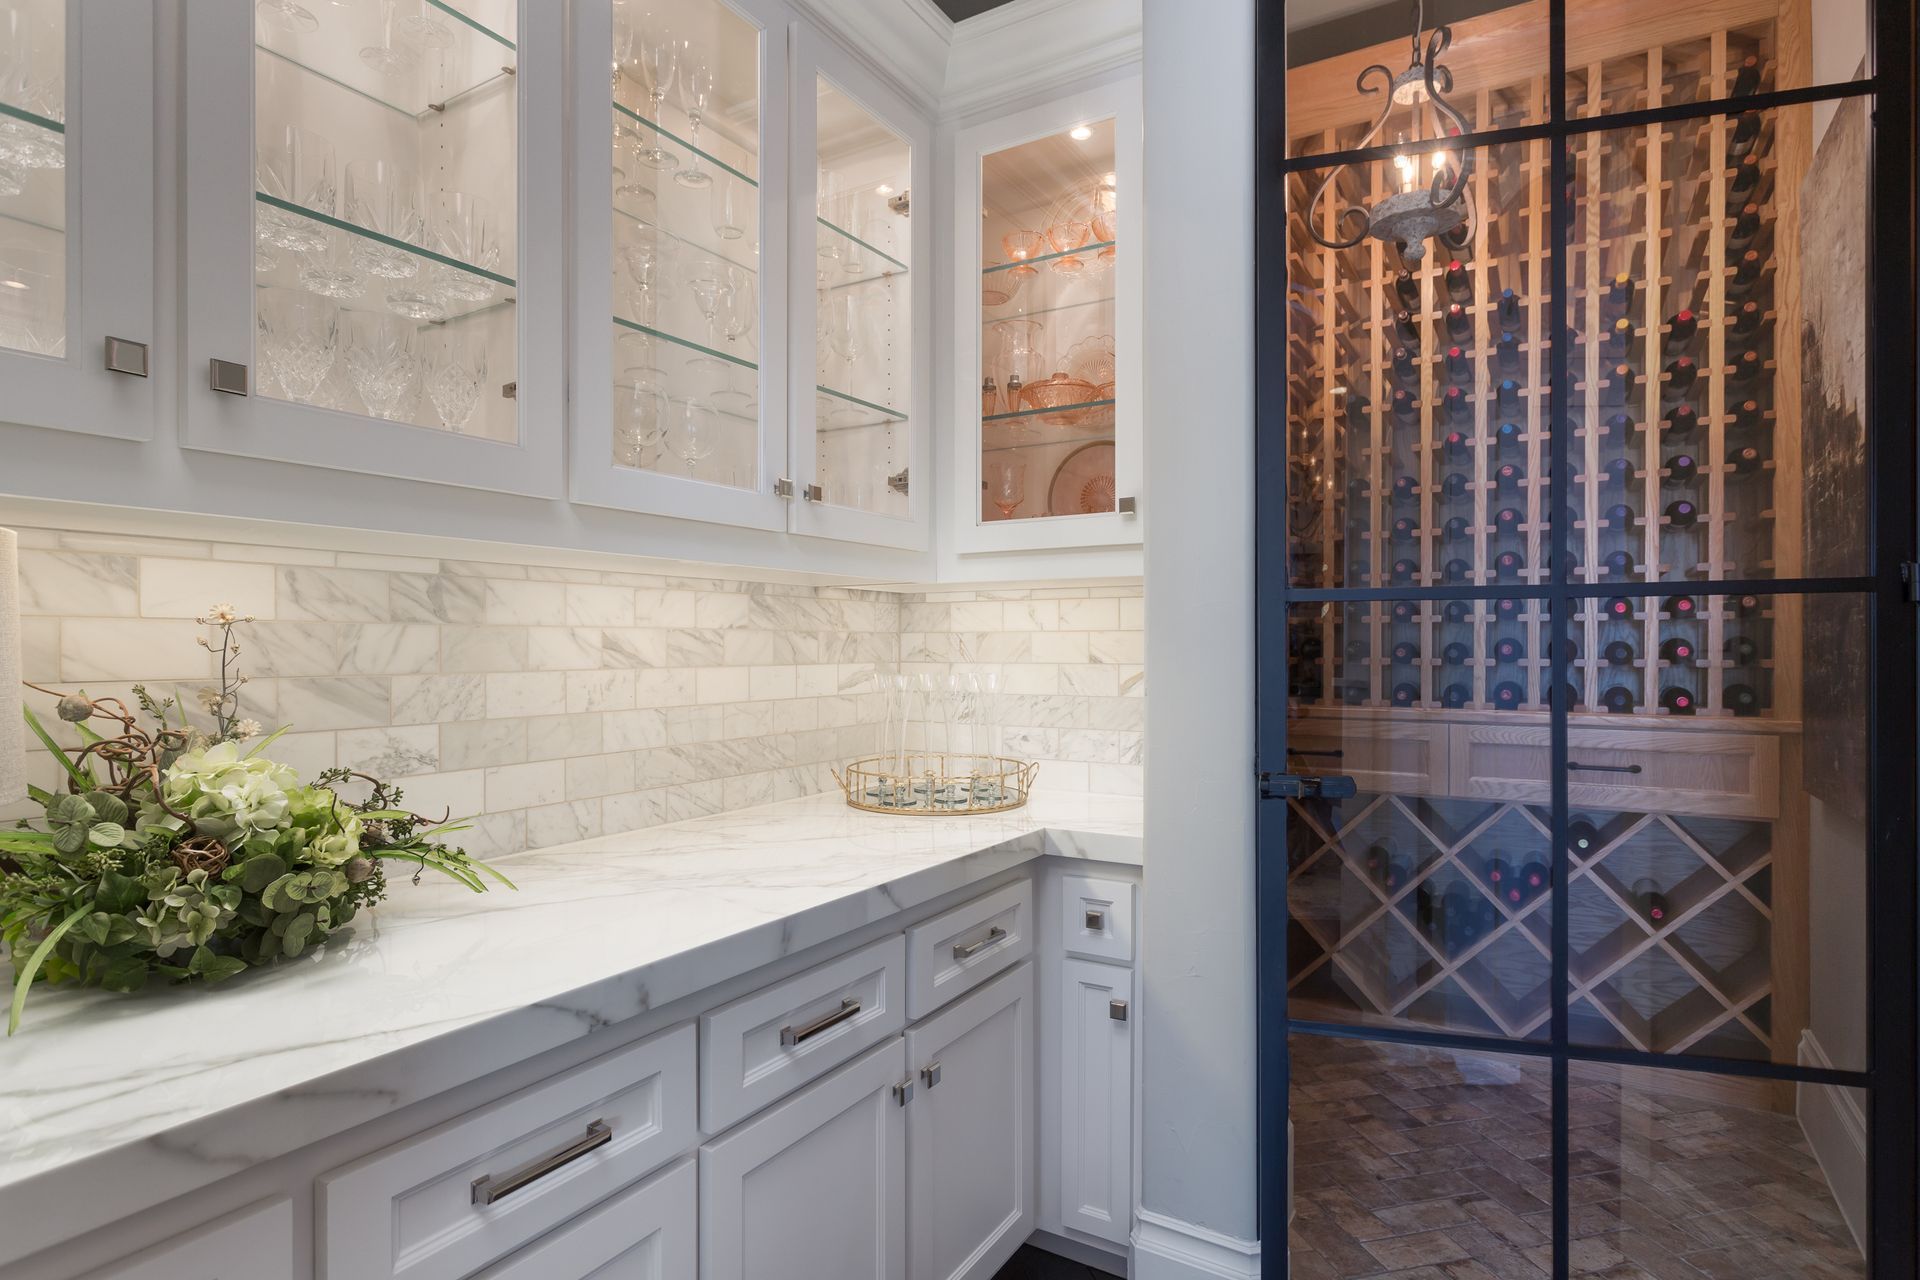 Custom Home Building: Elegant White Kitchen Cabinetry with Glass Doors and Wine Cellar View
